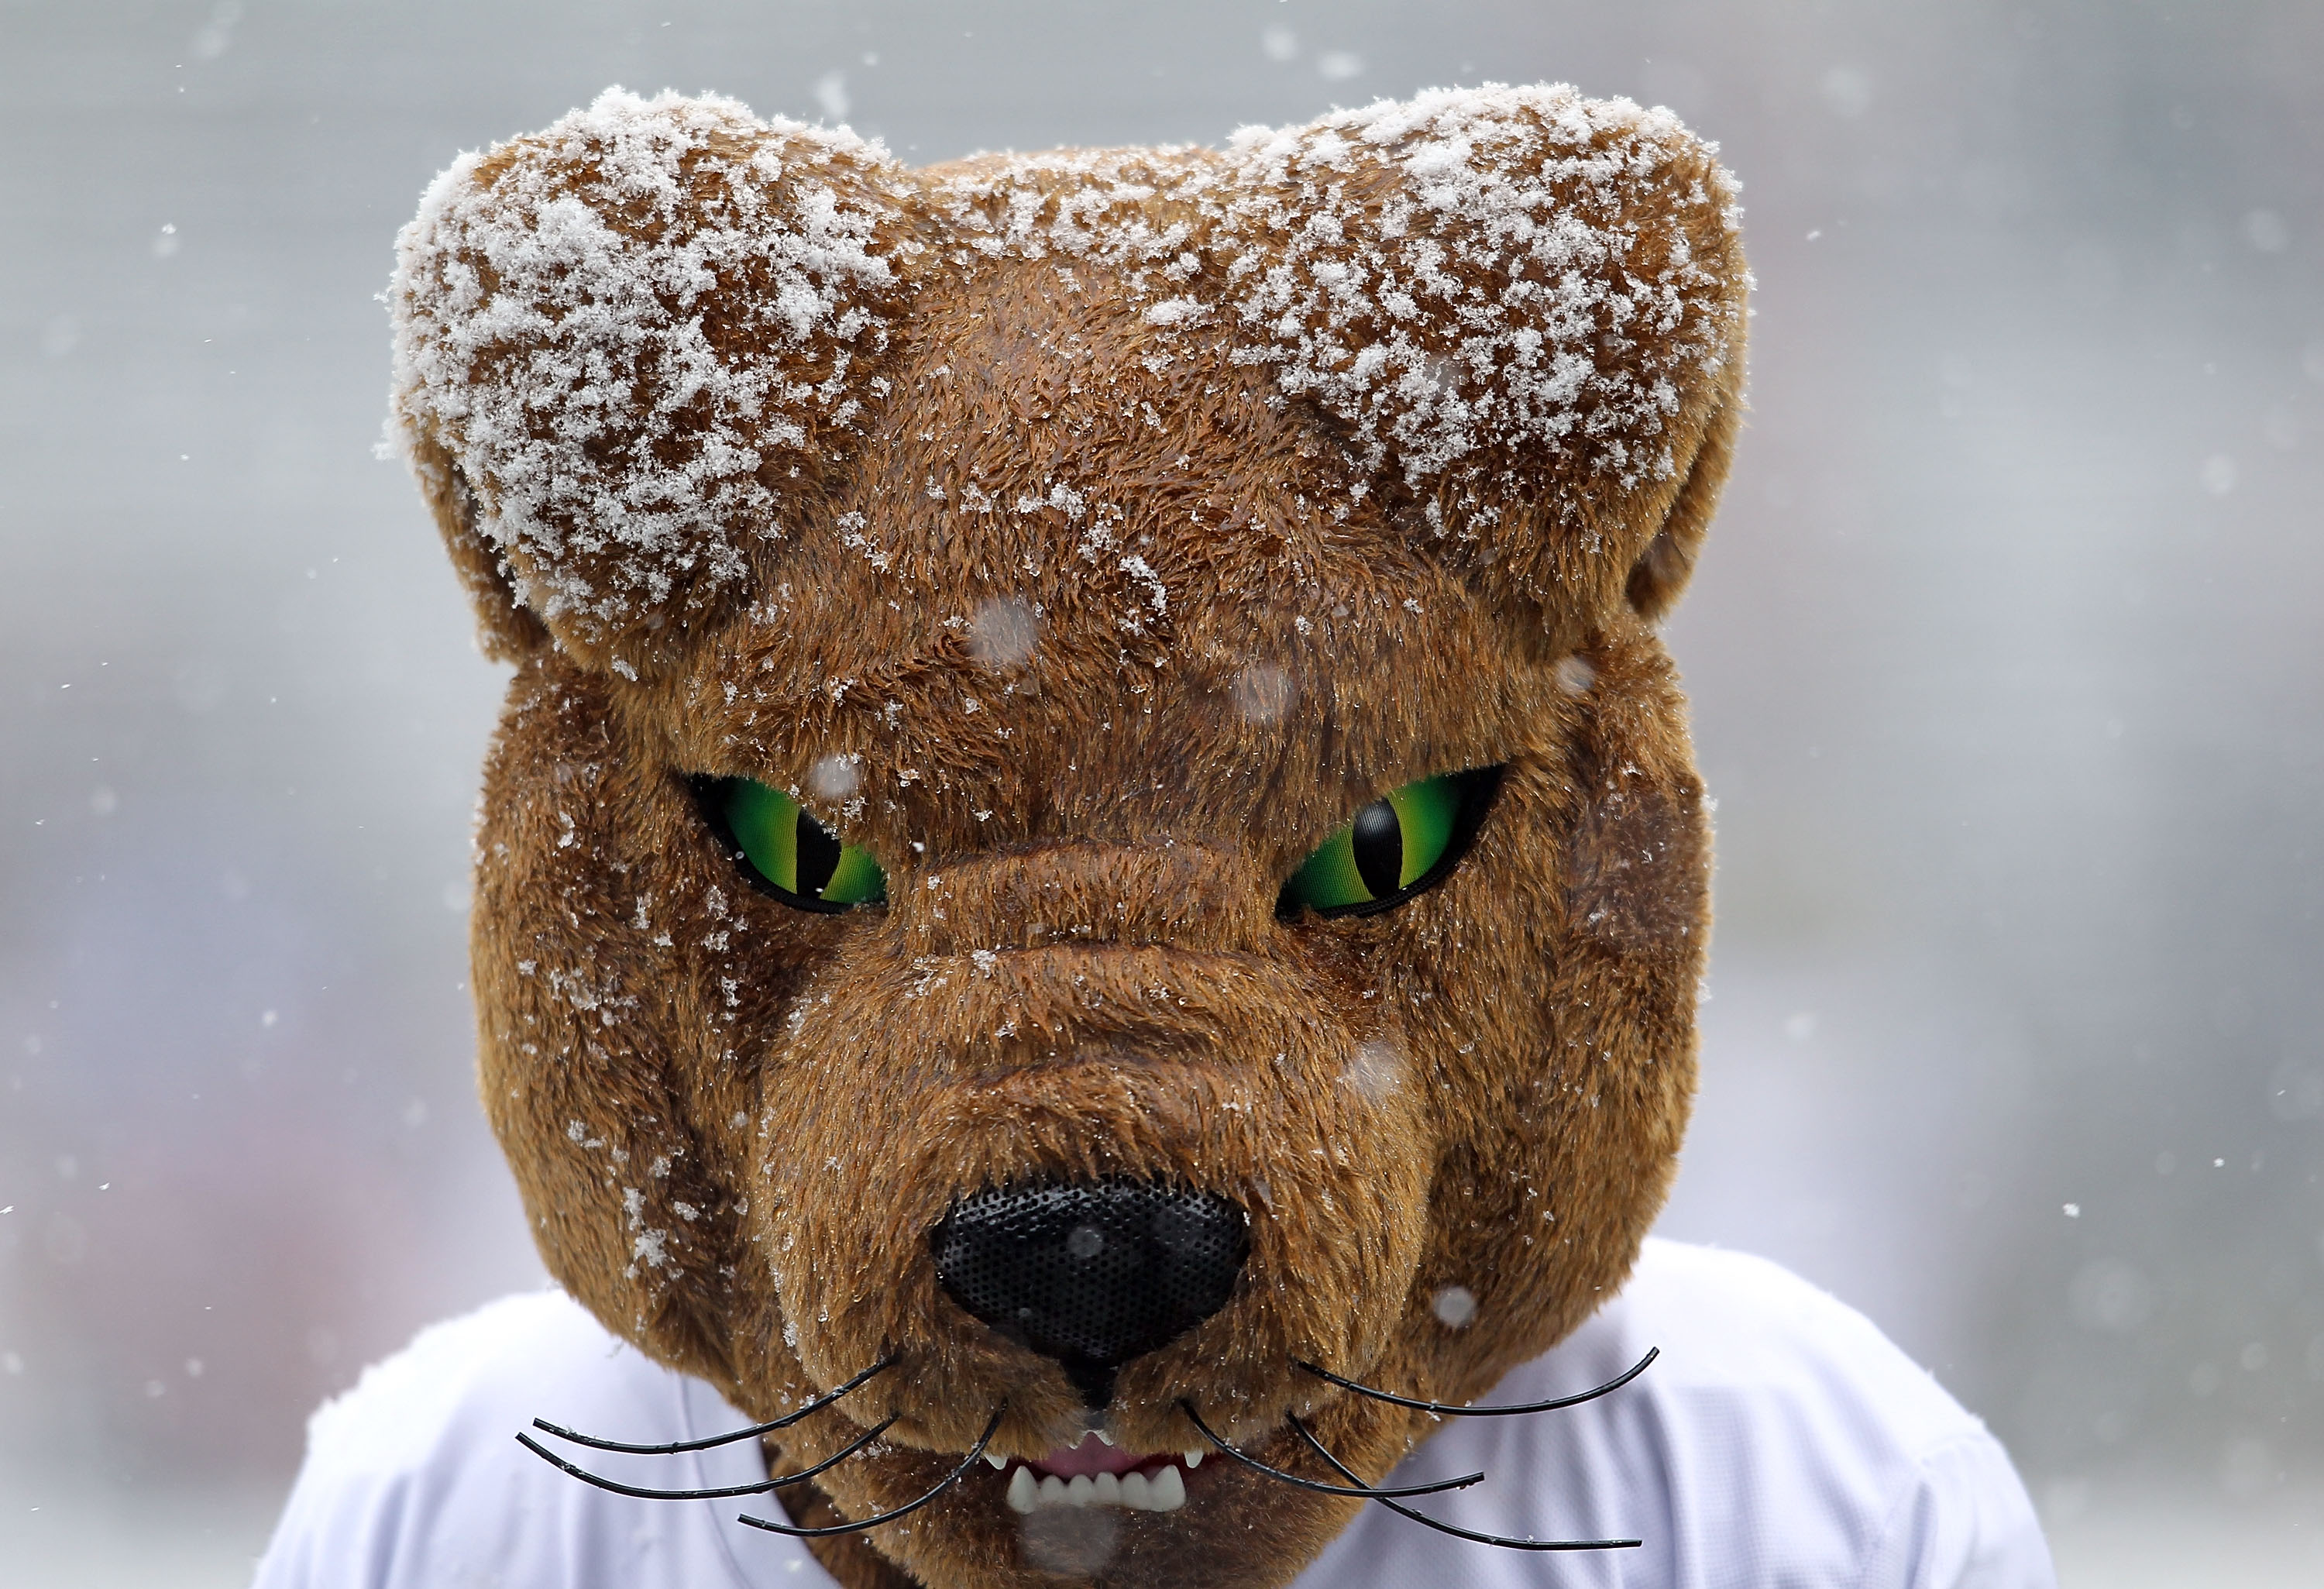 CINCINNATI, OH - DECEMBER 04:  The Pittsburg mascot is pictured covered in snow during the Big East Conference game between the the Pittsburgh Panthers and the Cincinnati Bearcats at Nippert Stadium on December 4, 2010 in Cincinnati, Ohio.  (Photo by Andy